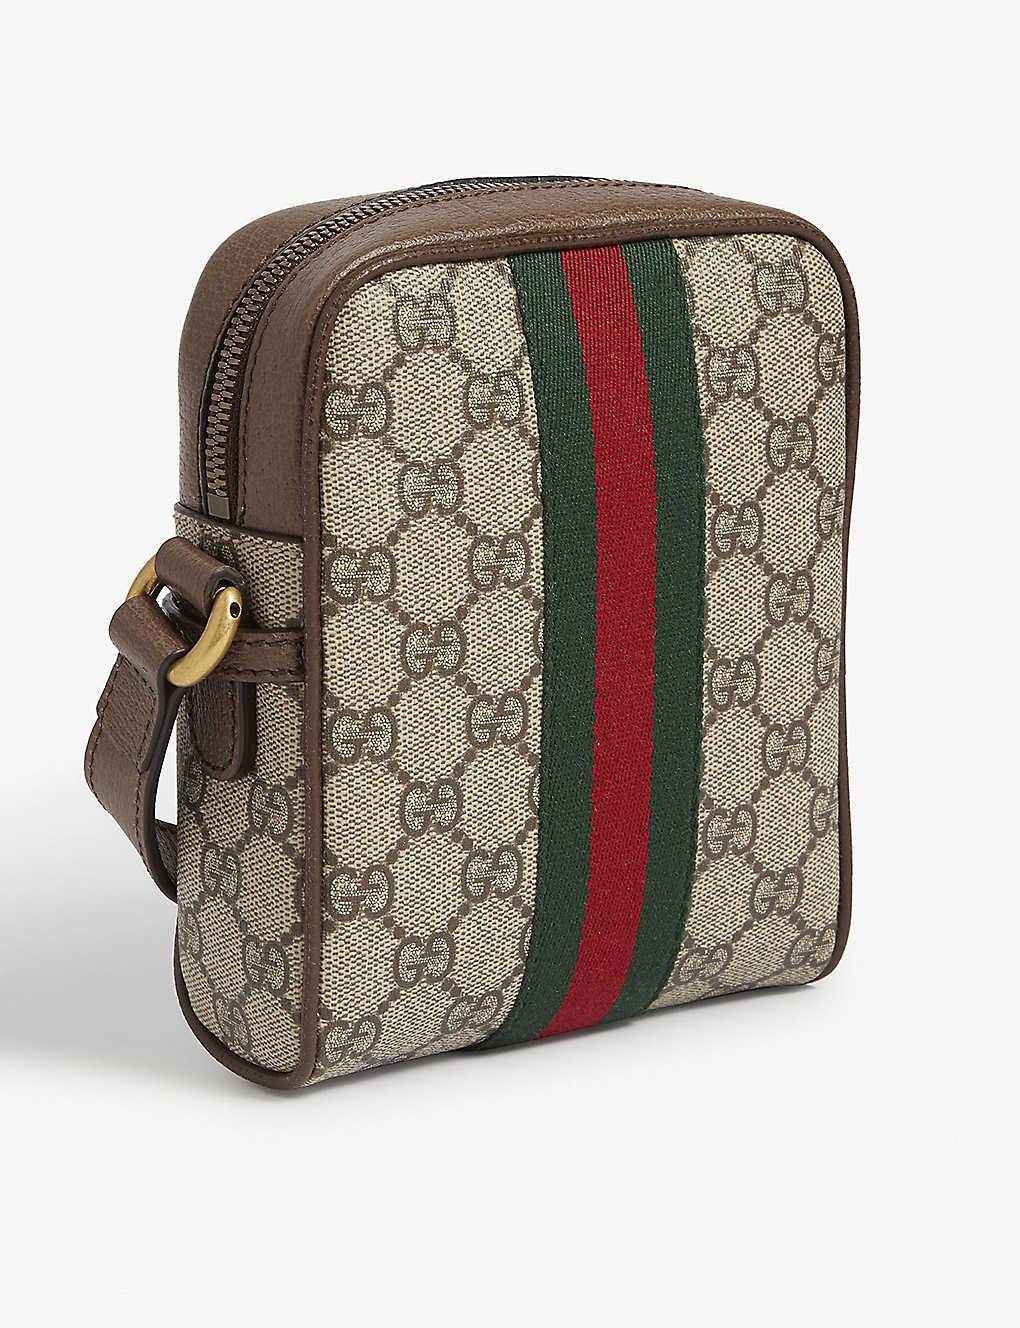 Gucci Canvas Ophidia Small Messenger Bag in Beige (Natural) for Men - Lyst